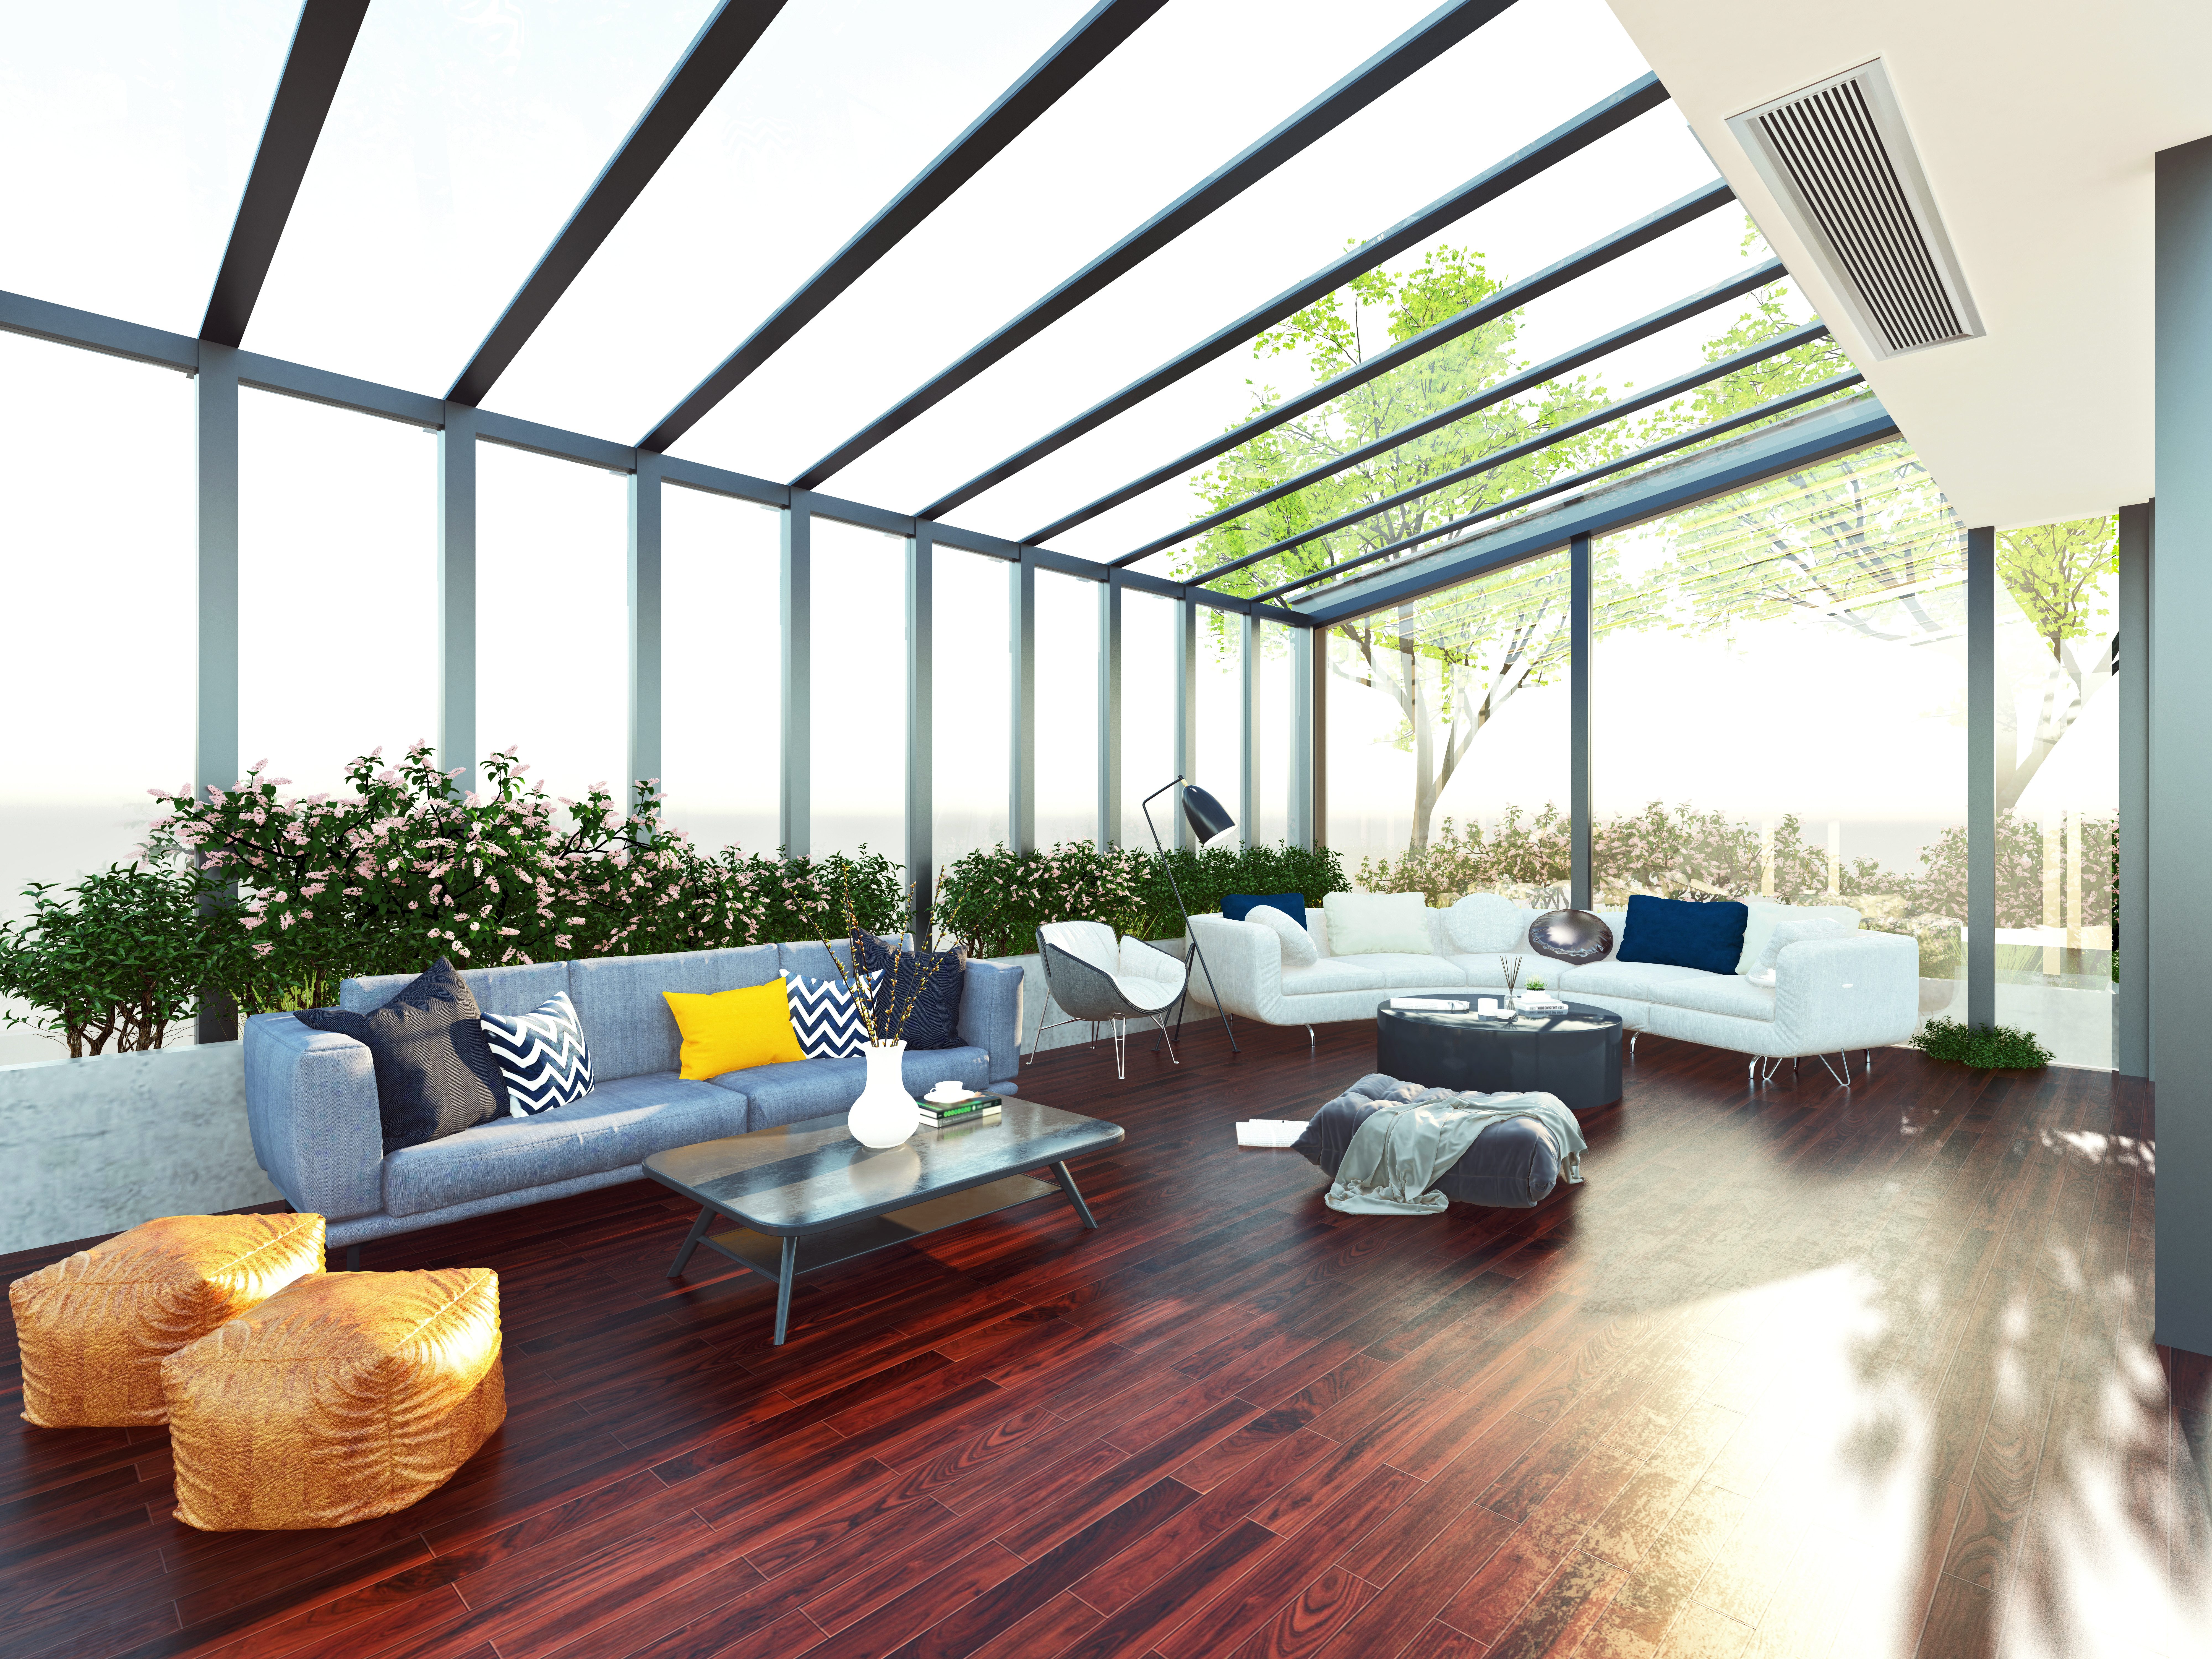 Greenhouse-like sunroom with large windows and living room furniture